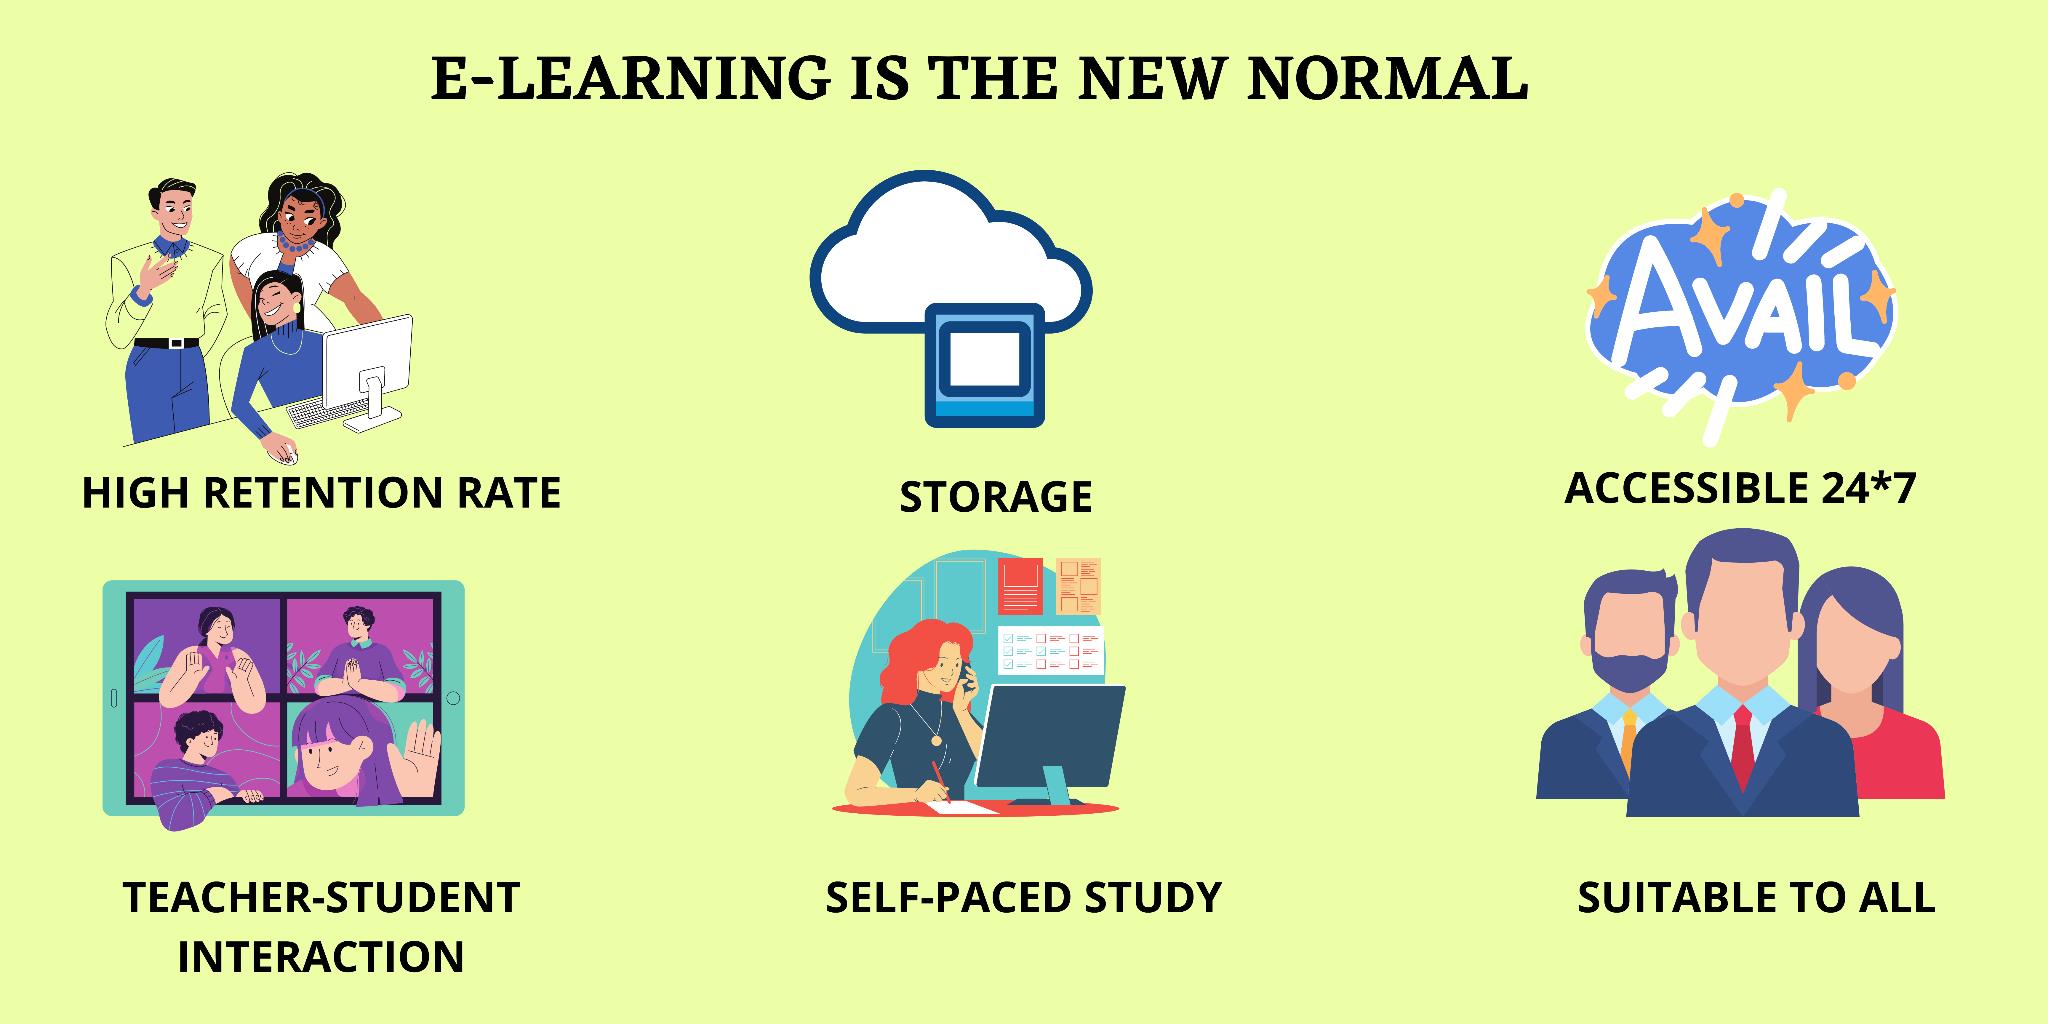 e-learning is the new normal